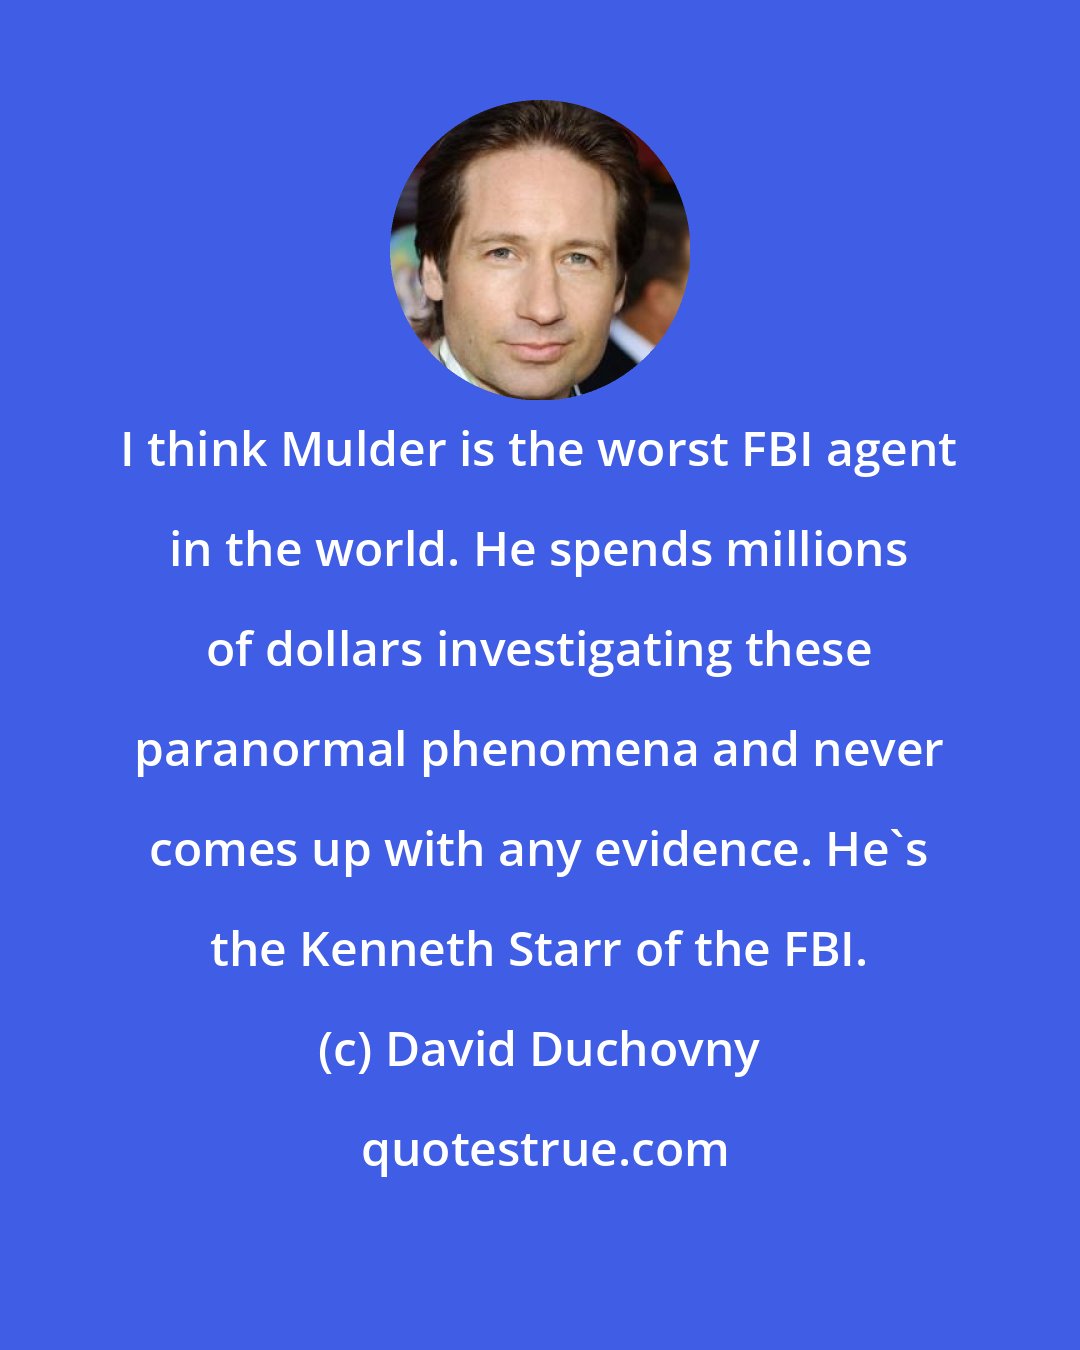 David Duchovny: I think Mulder is the worst FBI agent in the world. He spends millions of dollars investigating these paranormal phenomena and never comes up with any evidence. He's the Kenneth Starr of the FBI.